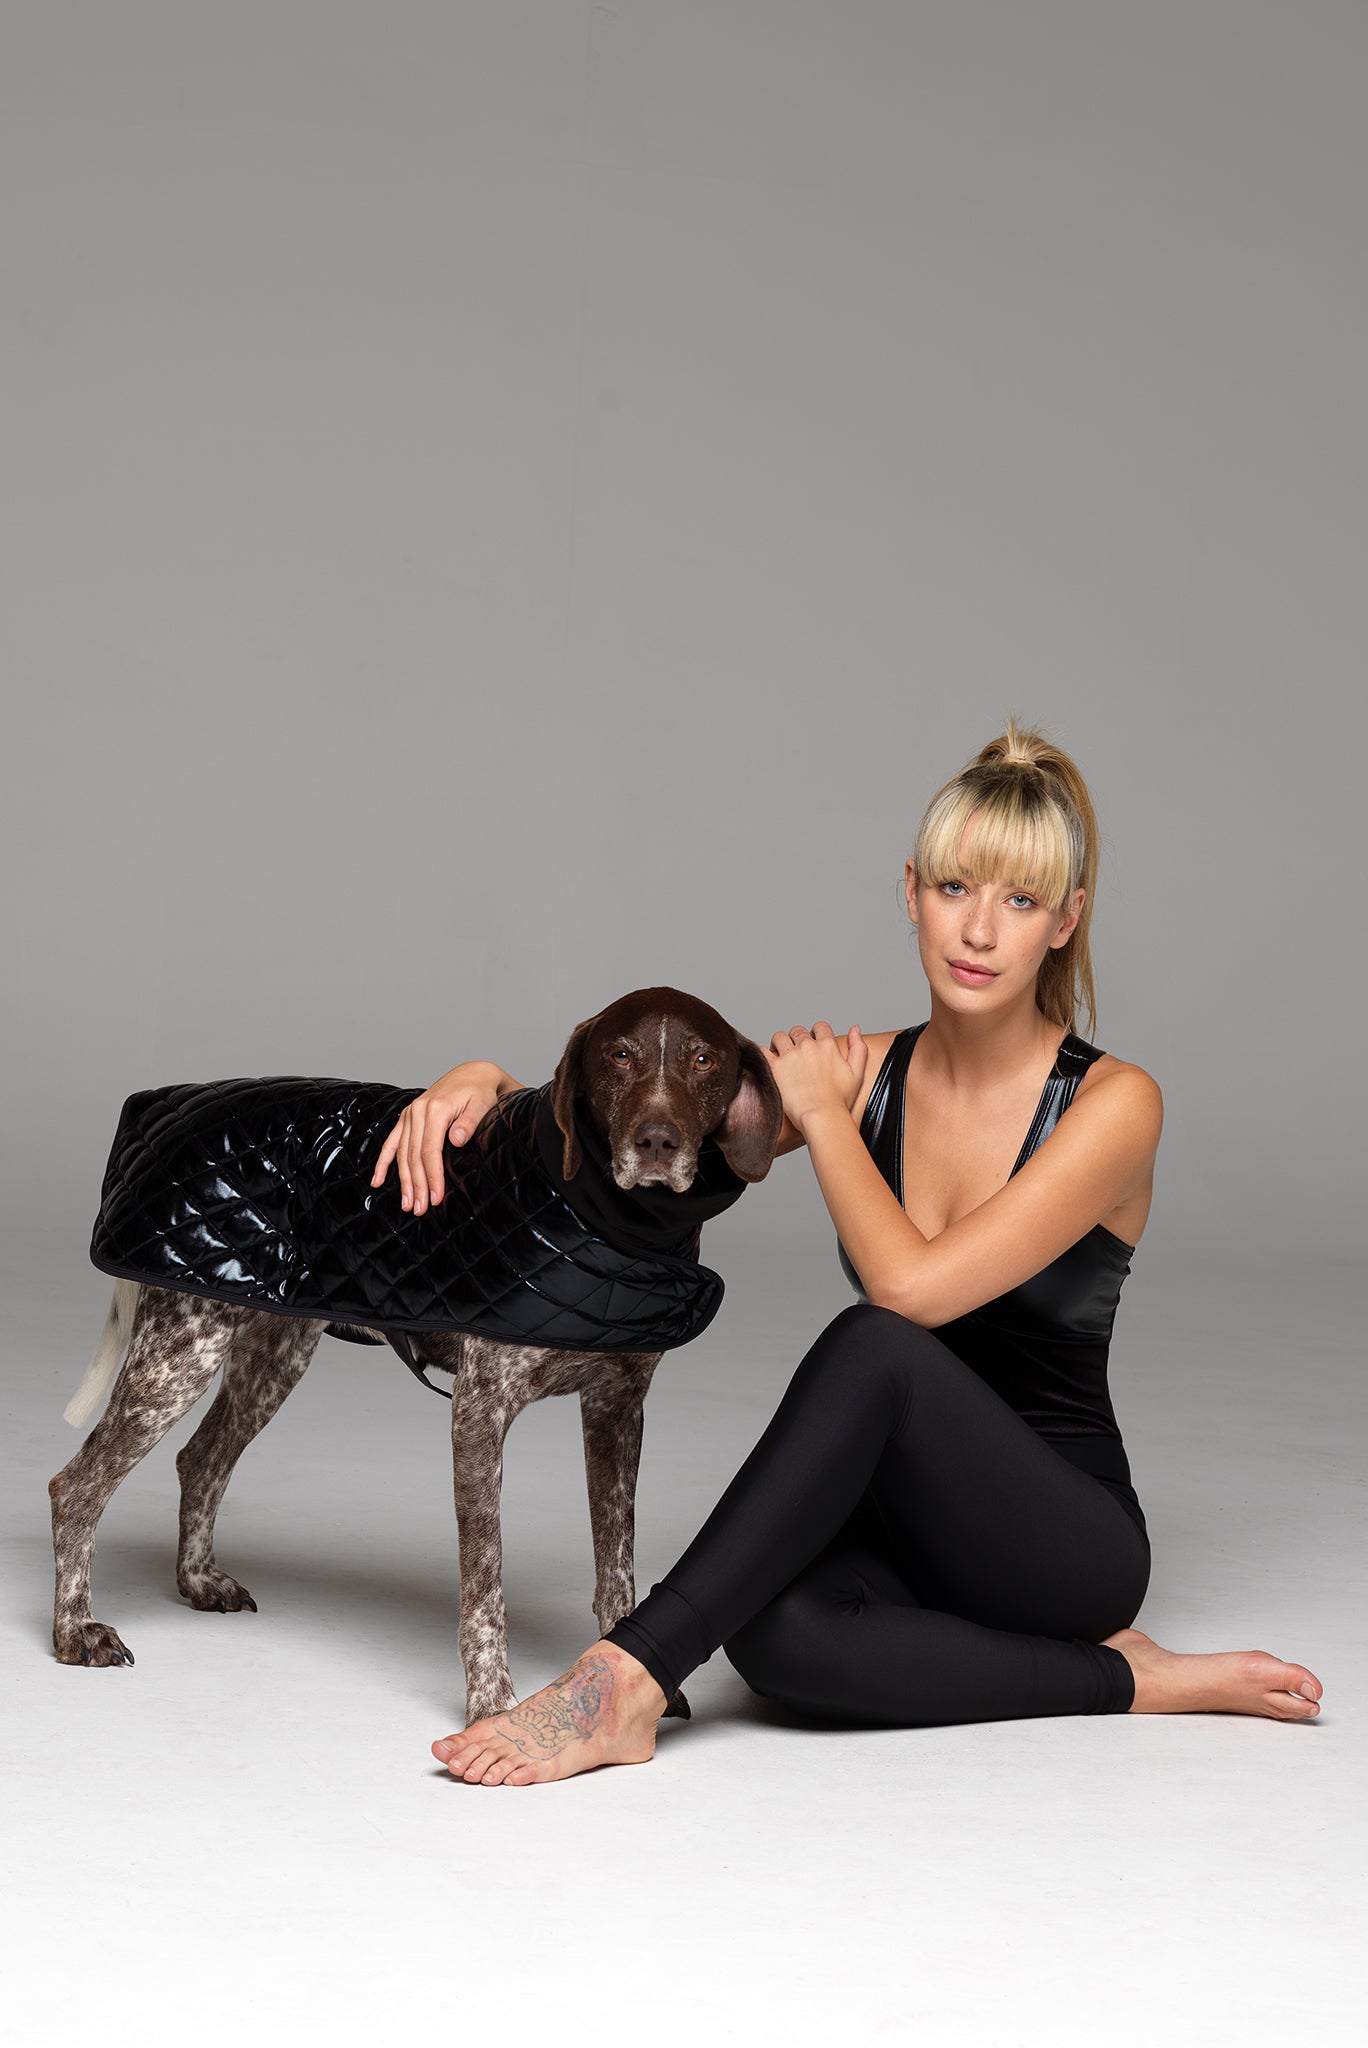 Dog in Alpha coat and Model in matching full piece "Night Call" catsuit.